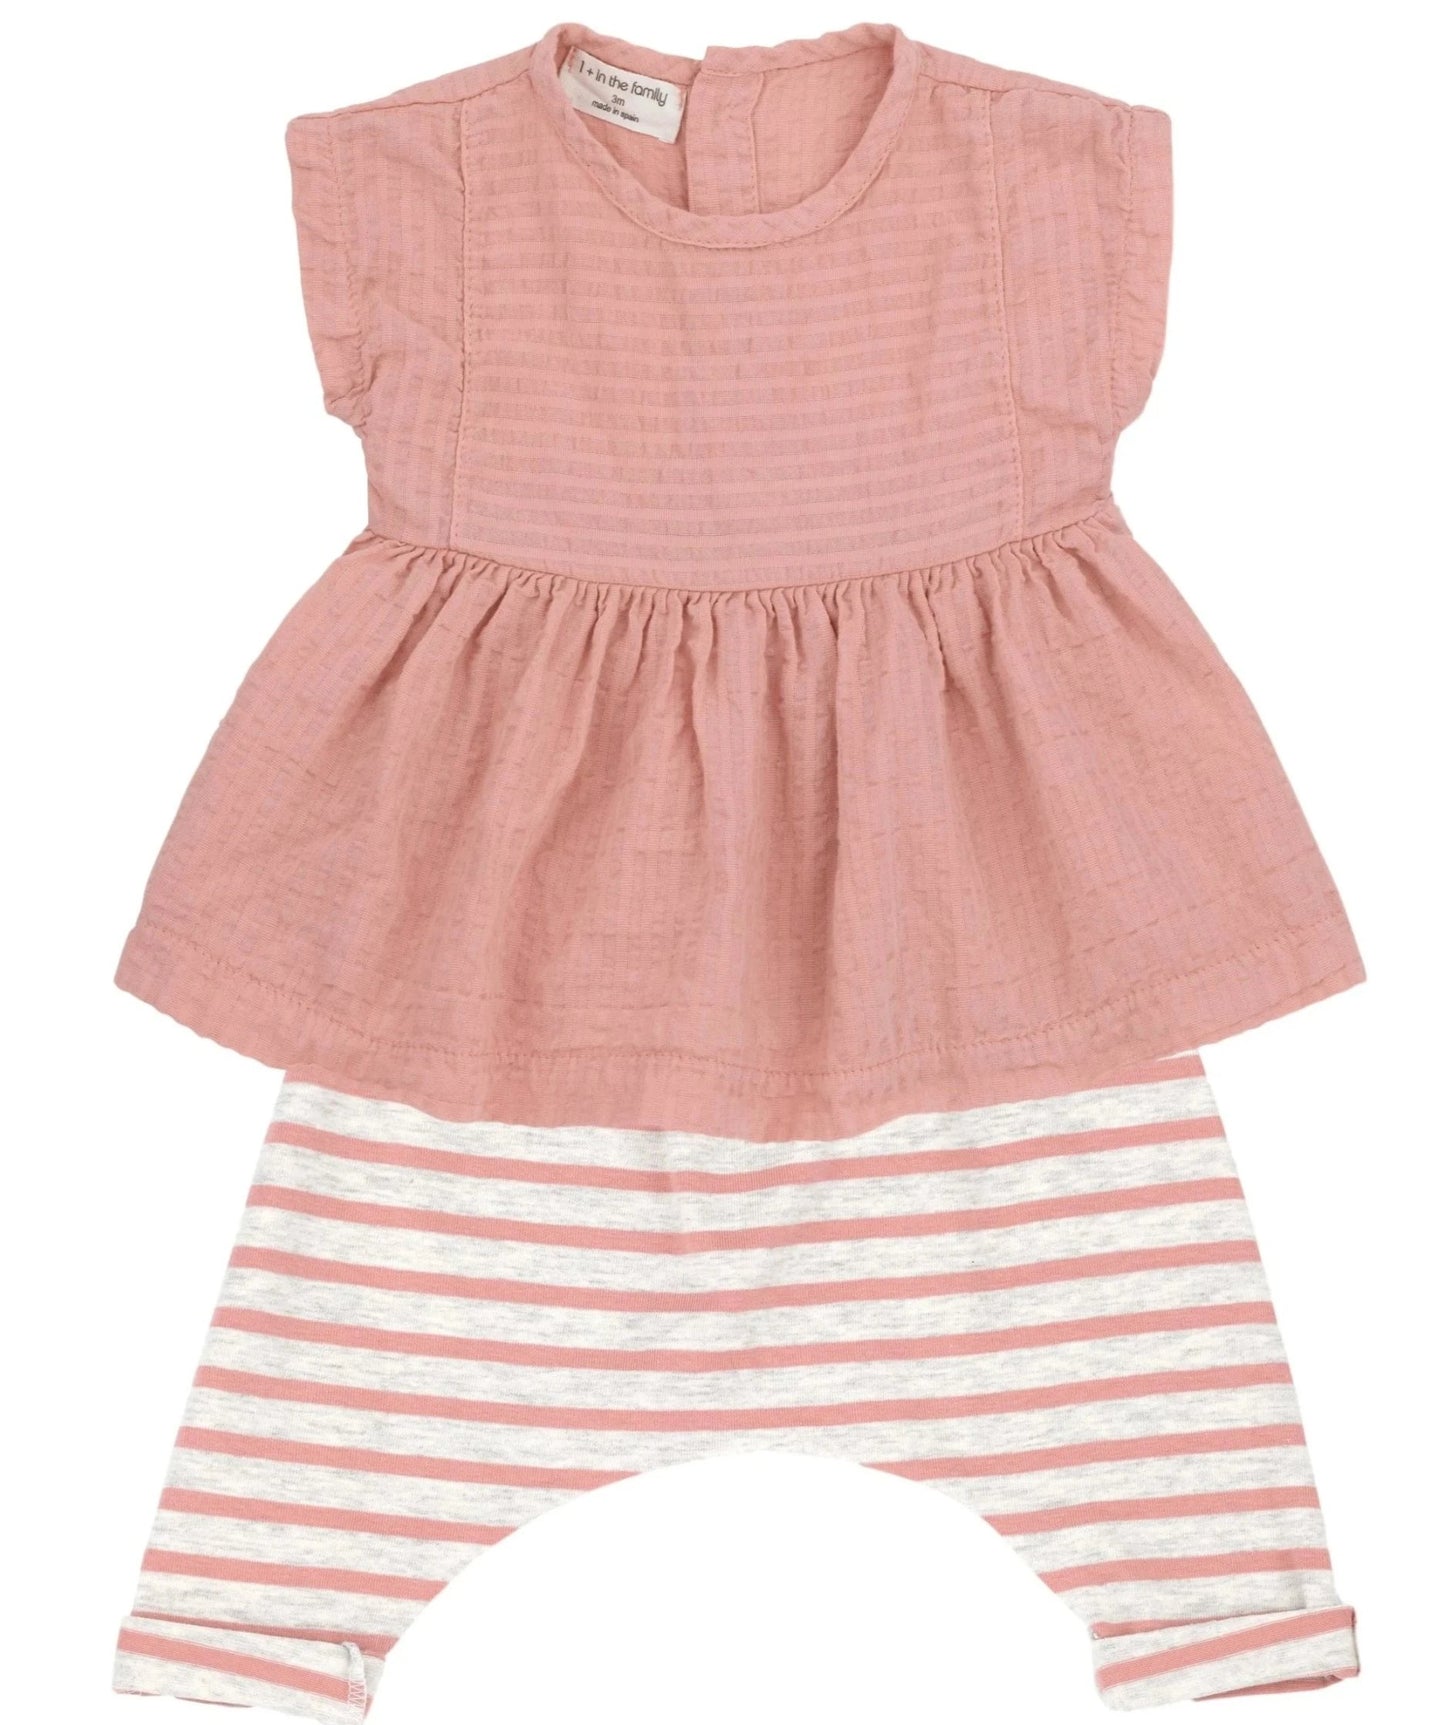 One + In the Family Baby Girl Deva & Sammy Outfit Set